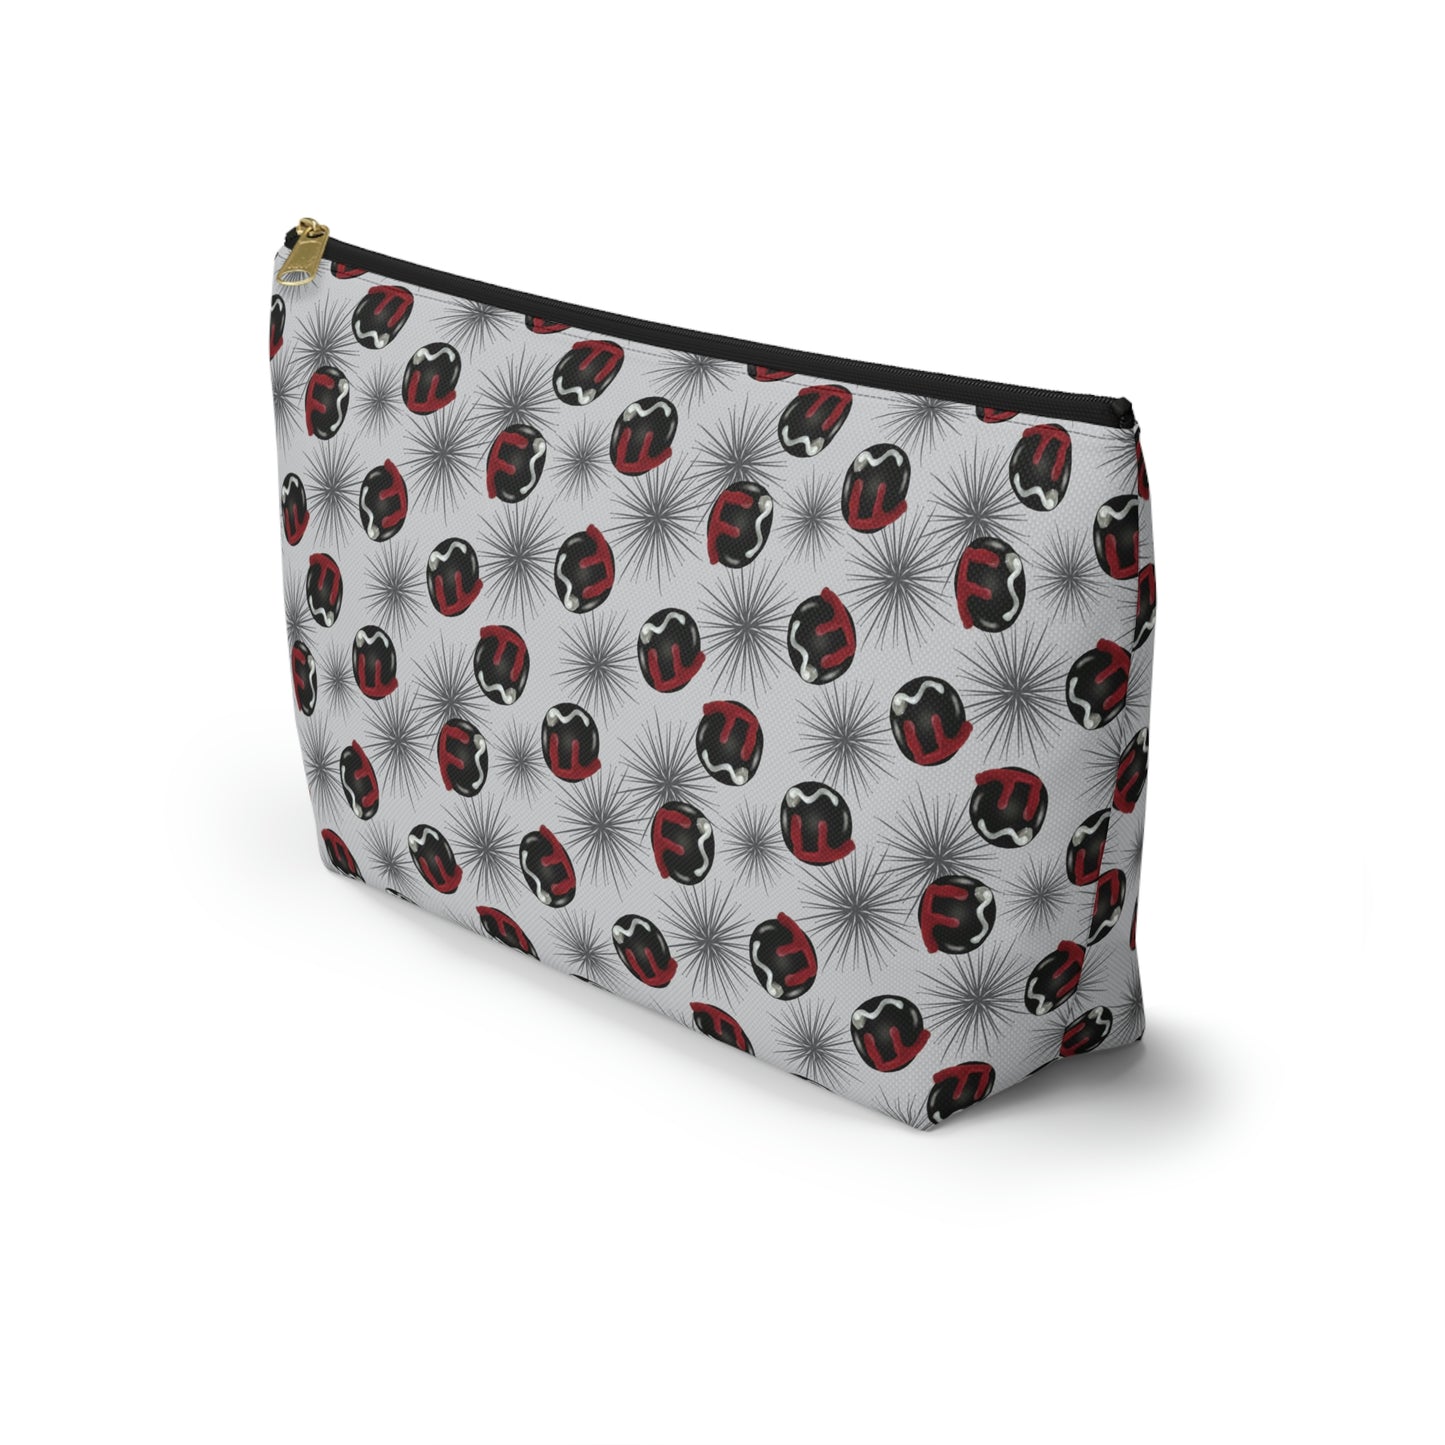 Accessory Pouch in F Bomb Pattern